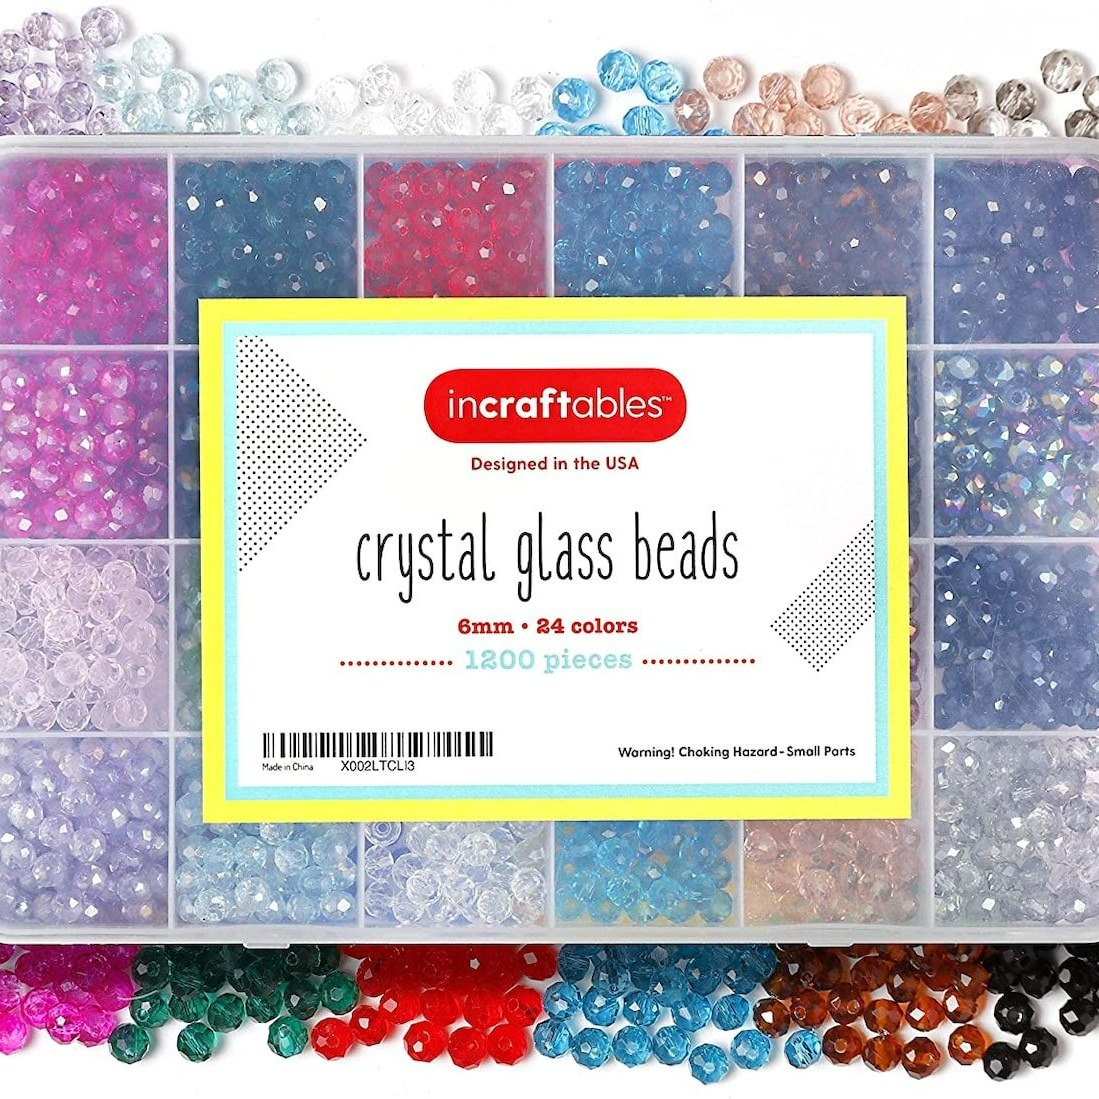 Incraftables Crystal Glass Beads 24 Colors 1200pcs Kit for Jewelry